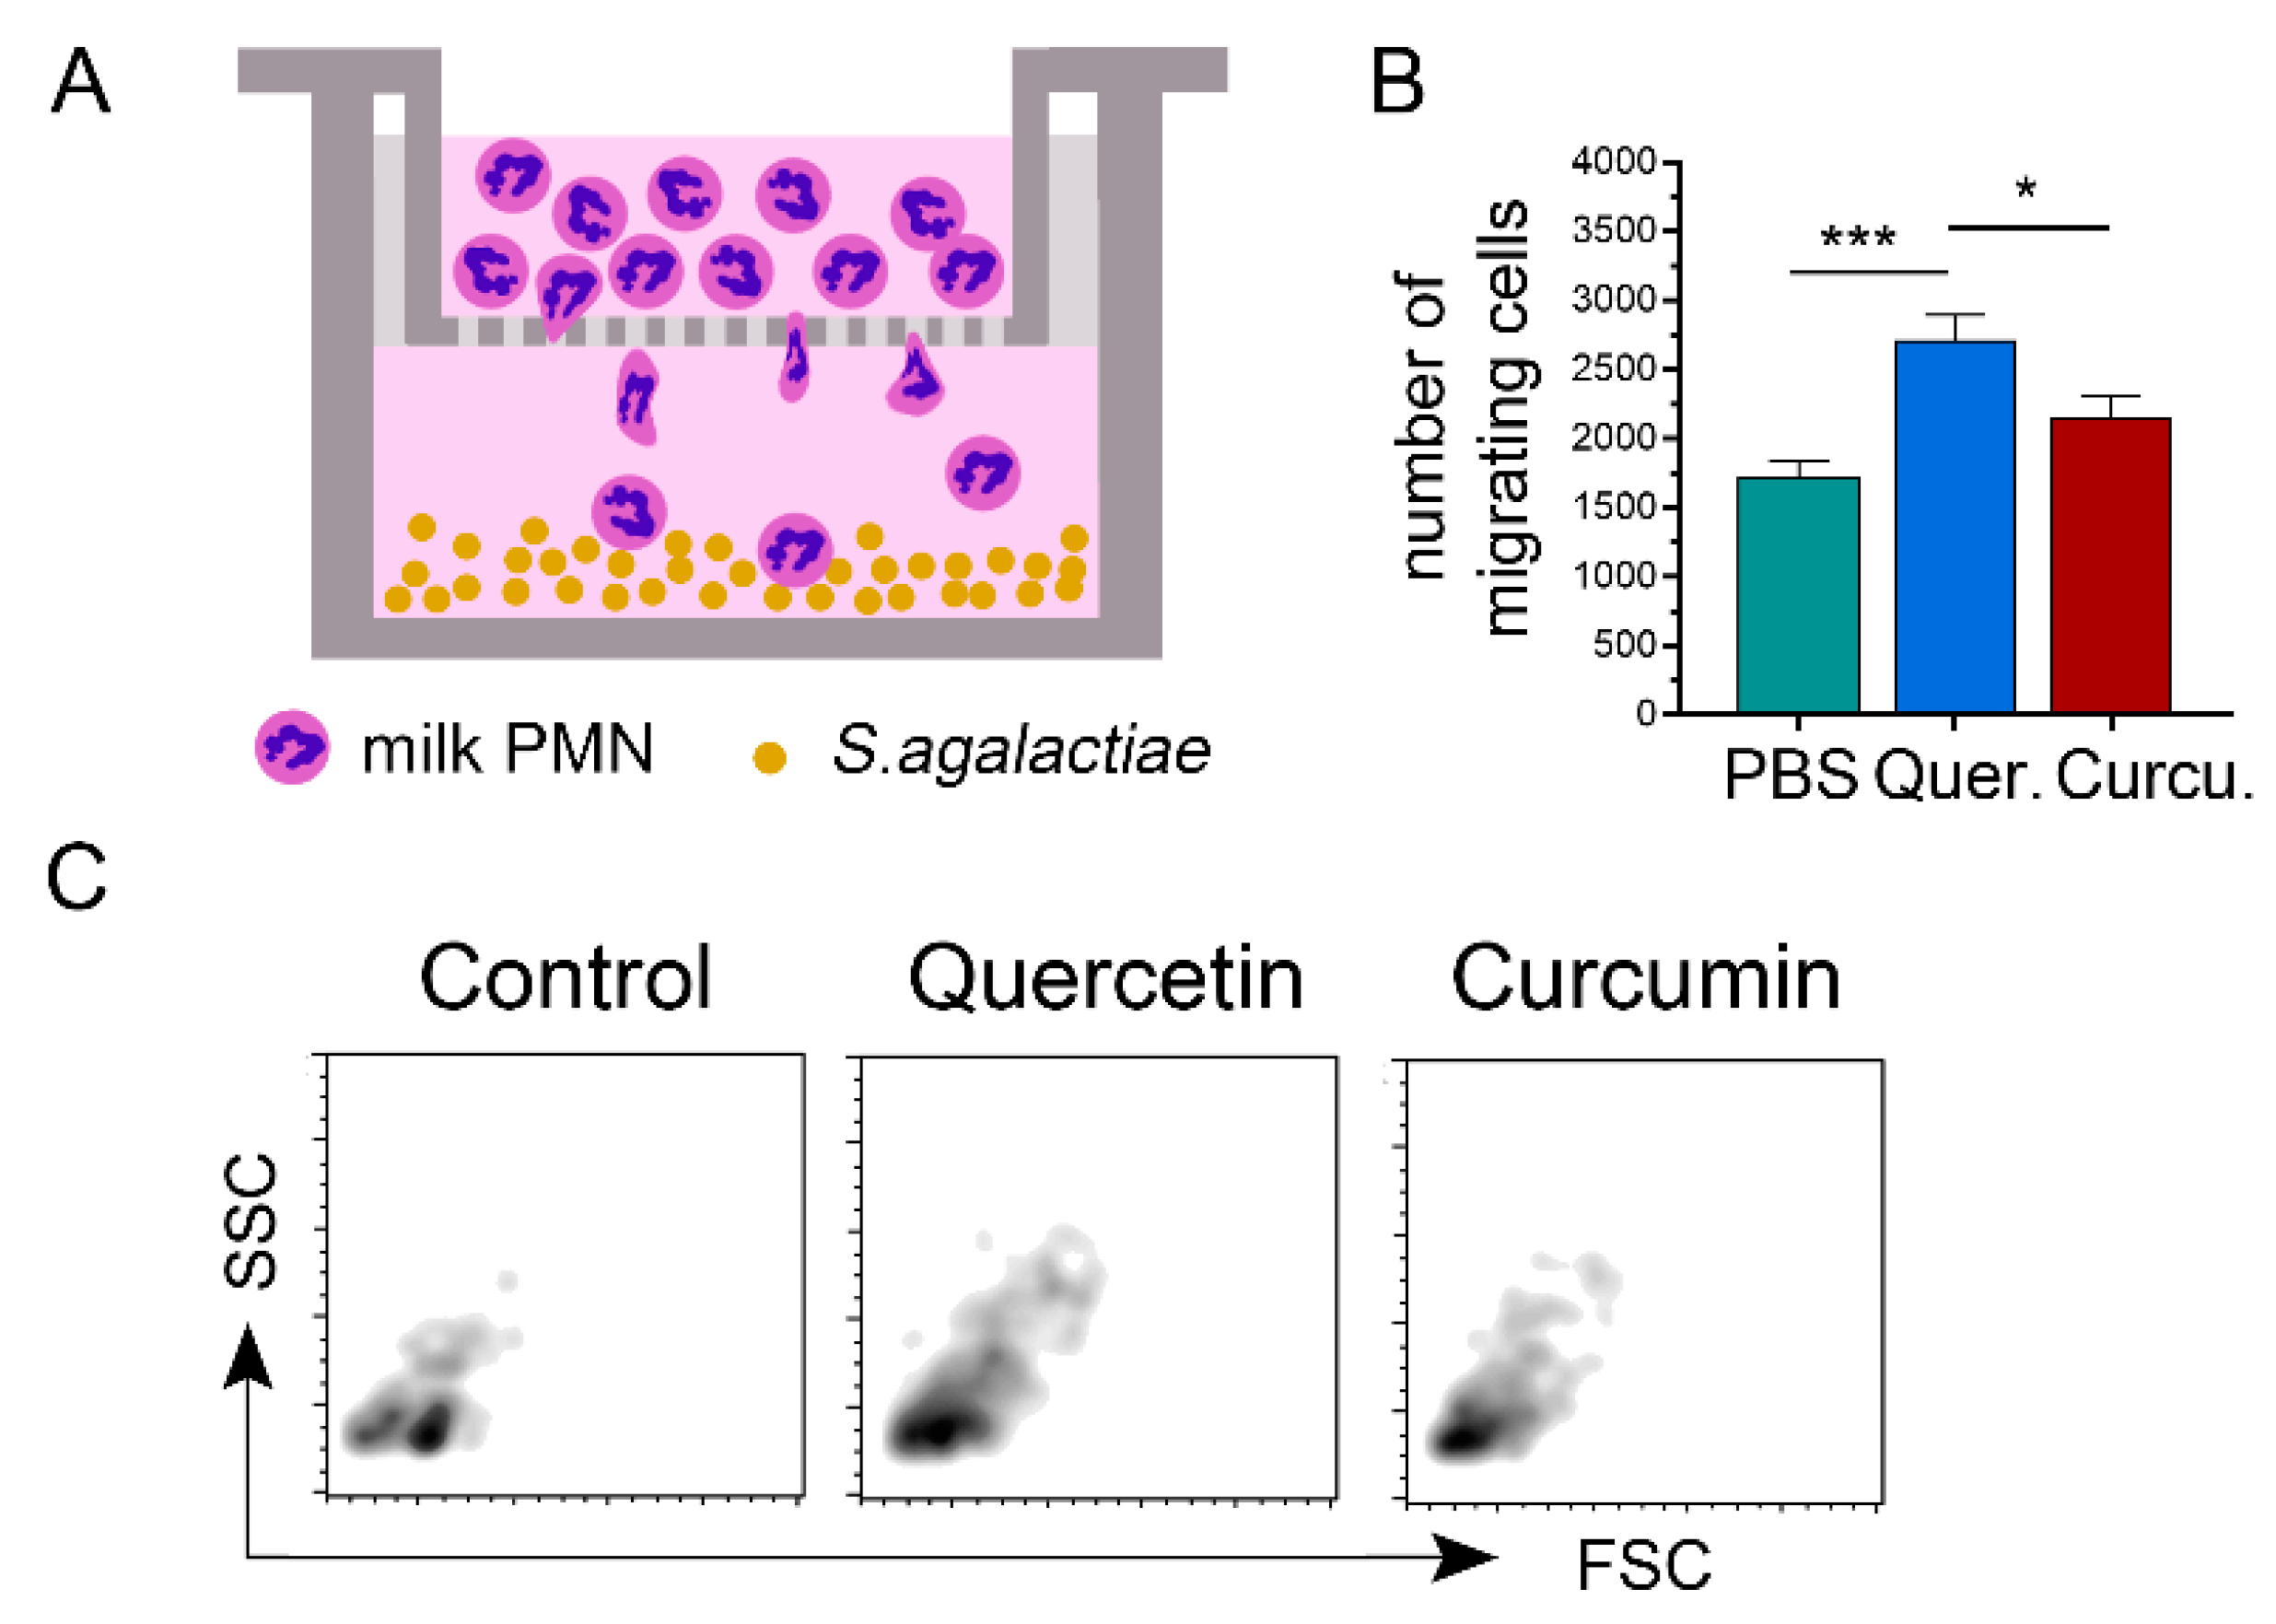 Animals | Free Full-Text | Immunomodulatory Effects of Herbal Compounds  Quercetin and Curcumin on Cellular and Molecular Functions of  Bovine-Milk-Isolated Neutrophils toward Streptococcus agalactiae Infection